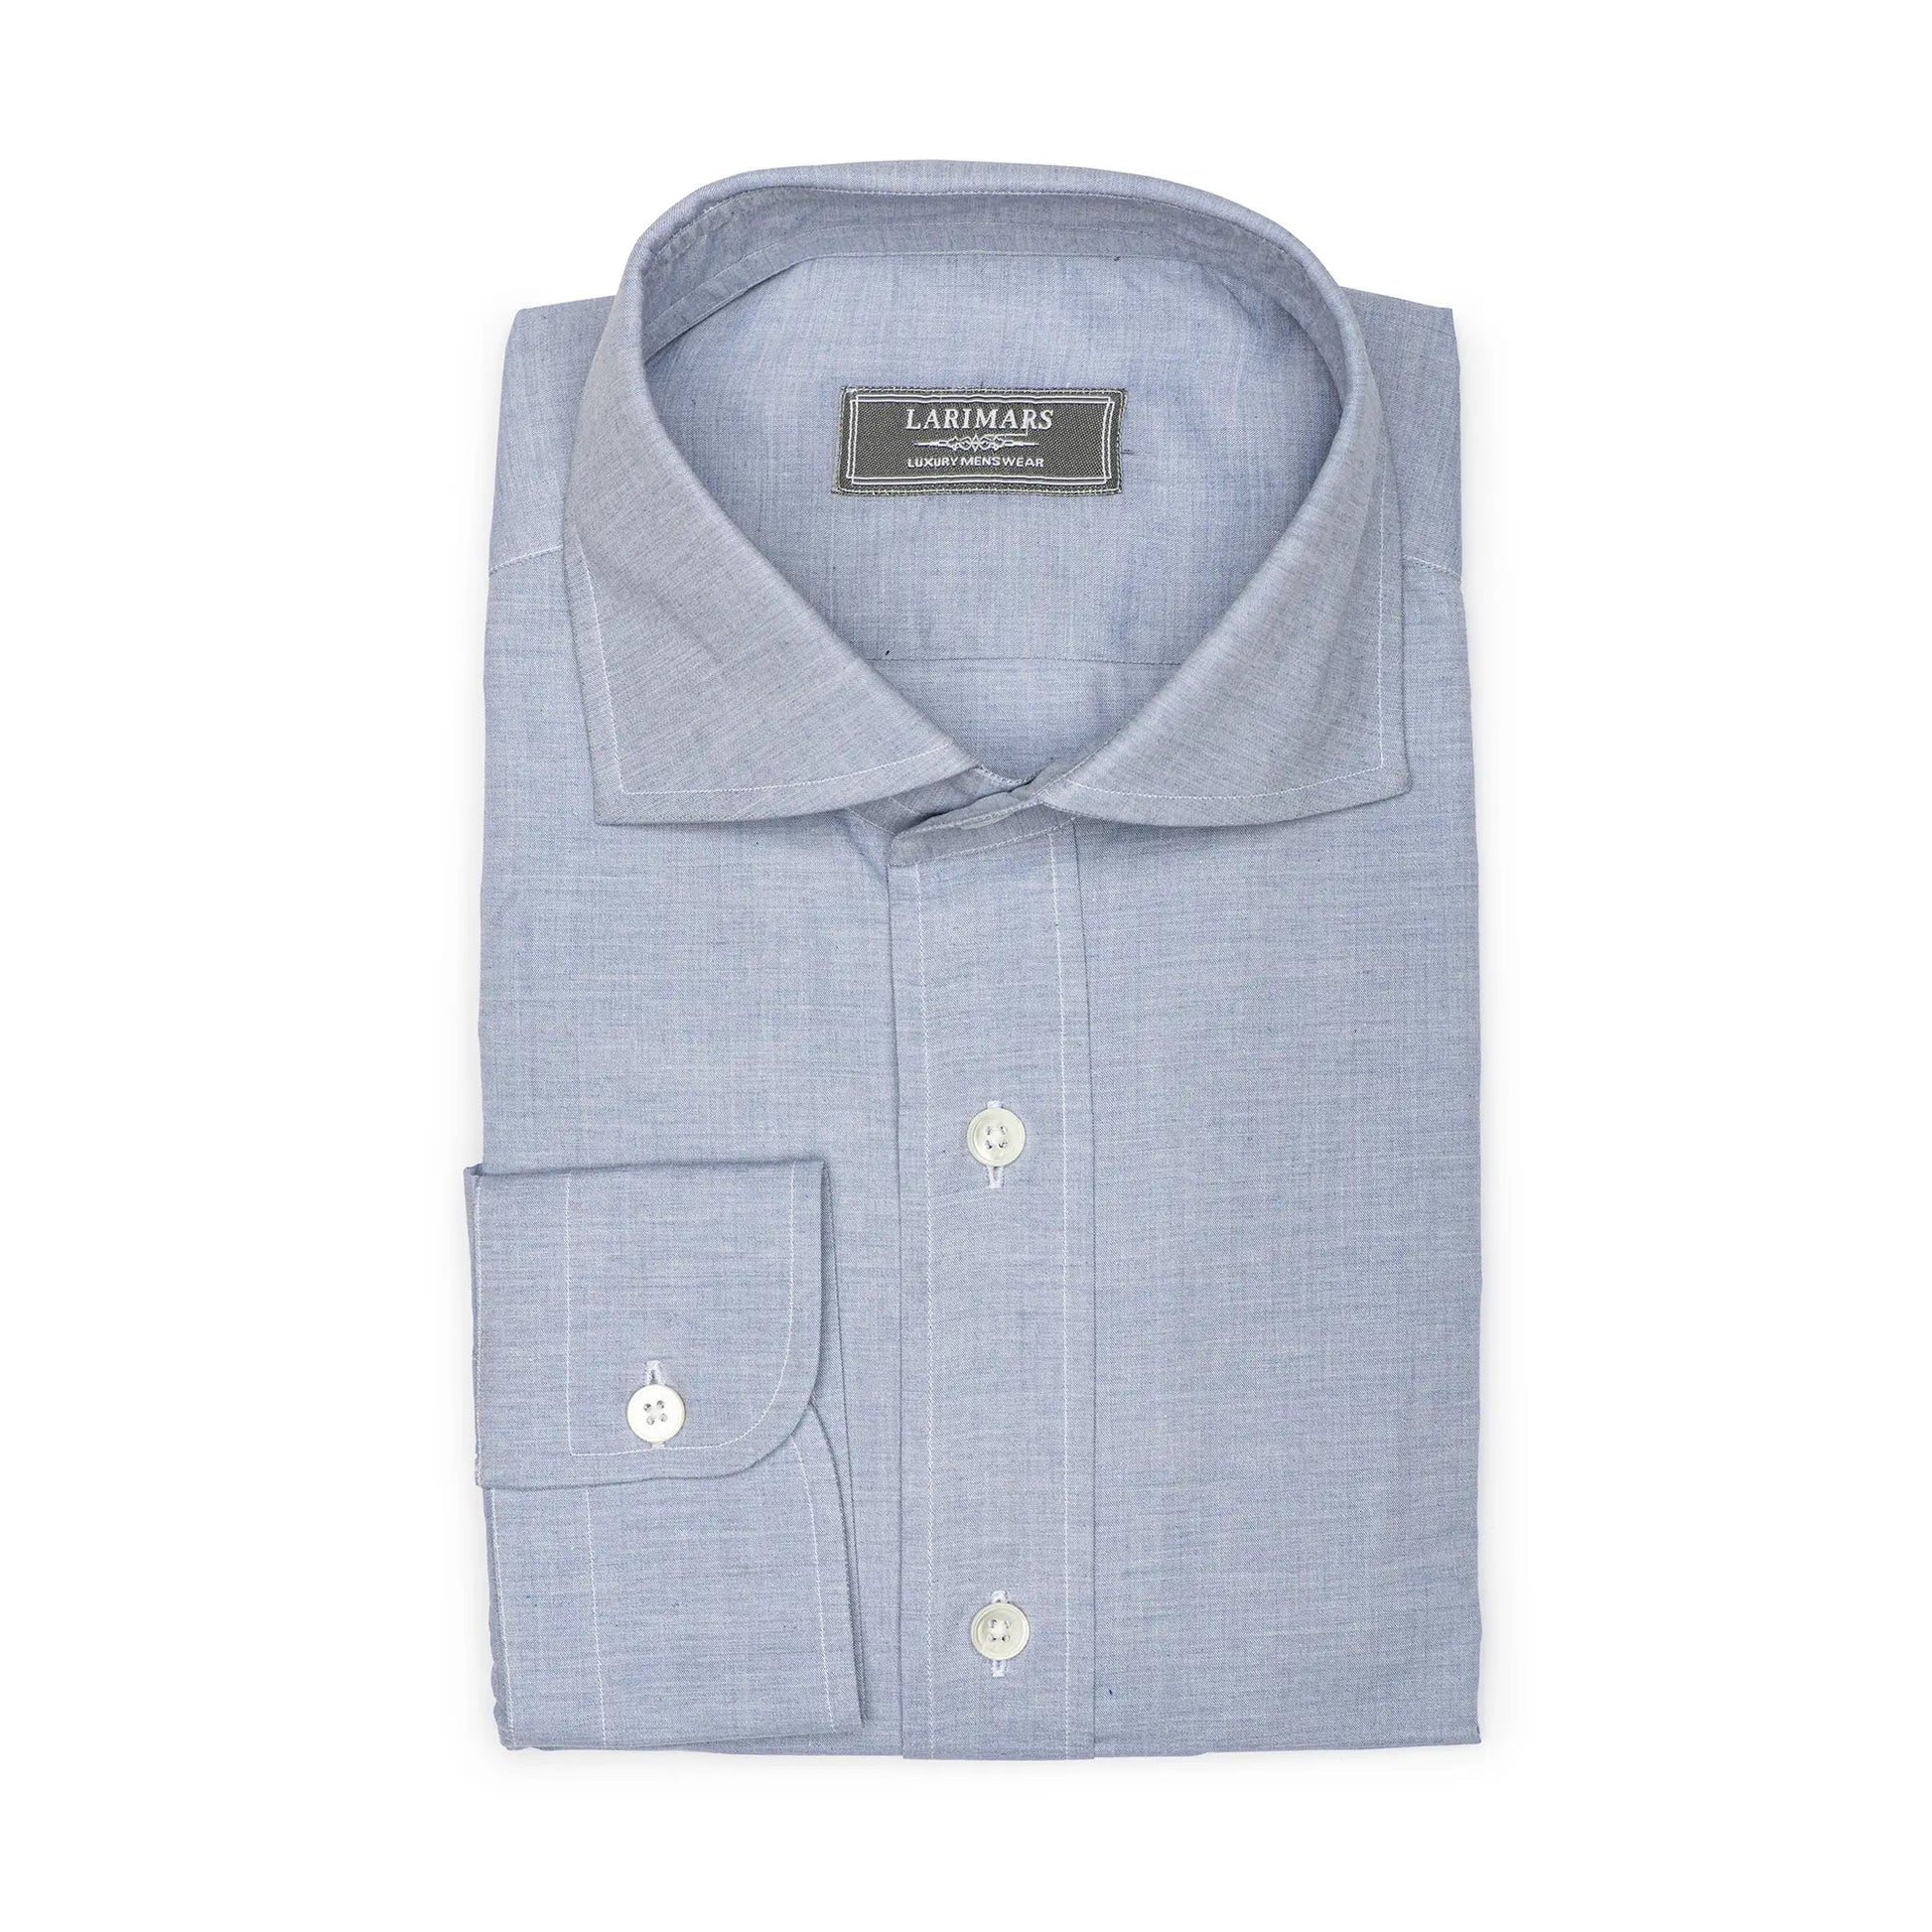 Blue Chambray - Larimars Clothing Men's Formal and casual wear shirts